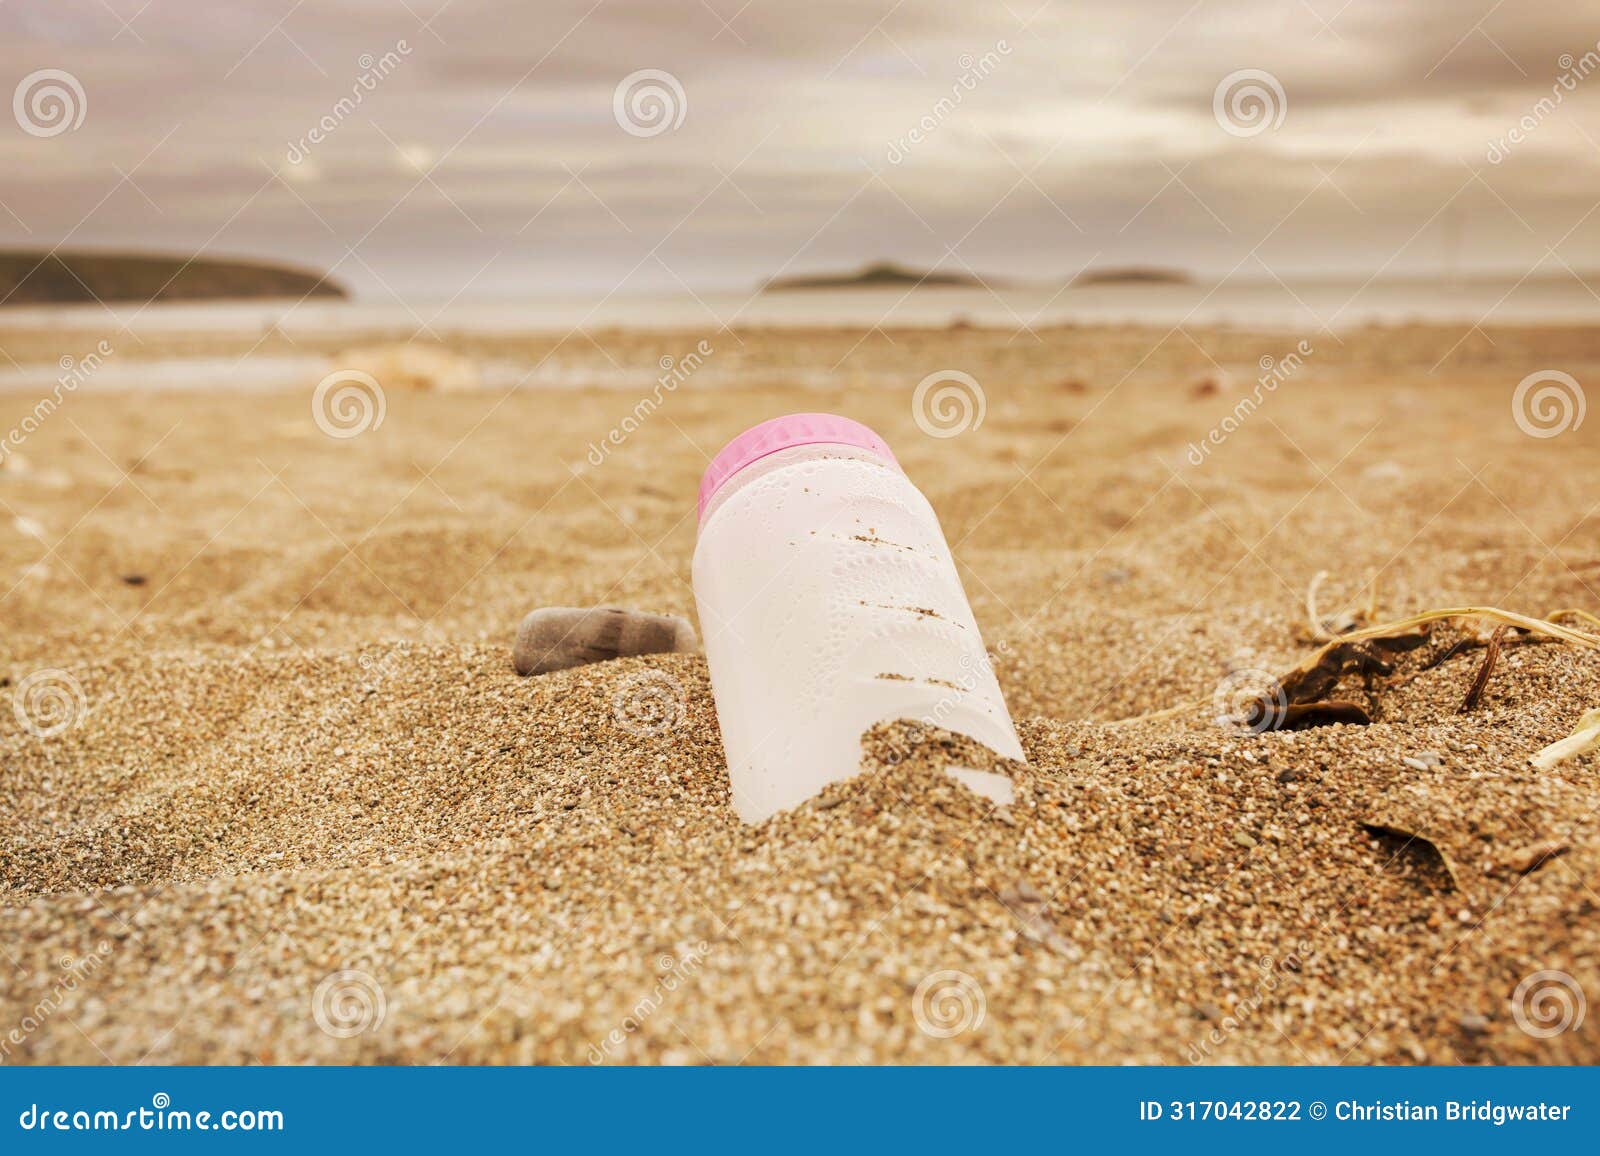 plastic water bottle left discarded on a beach in wales. plastic waste in our oceans